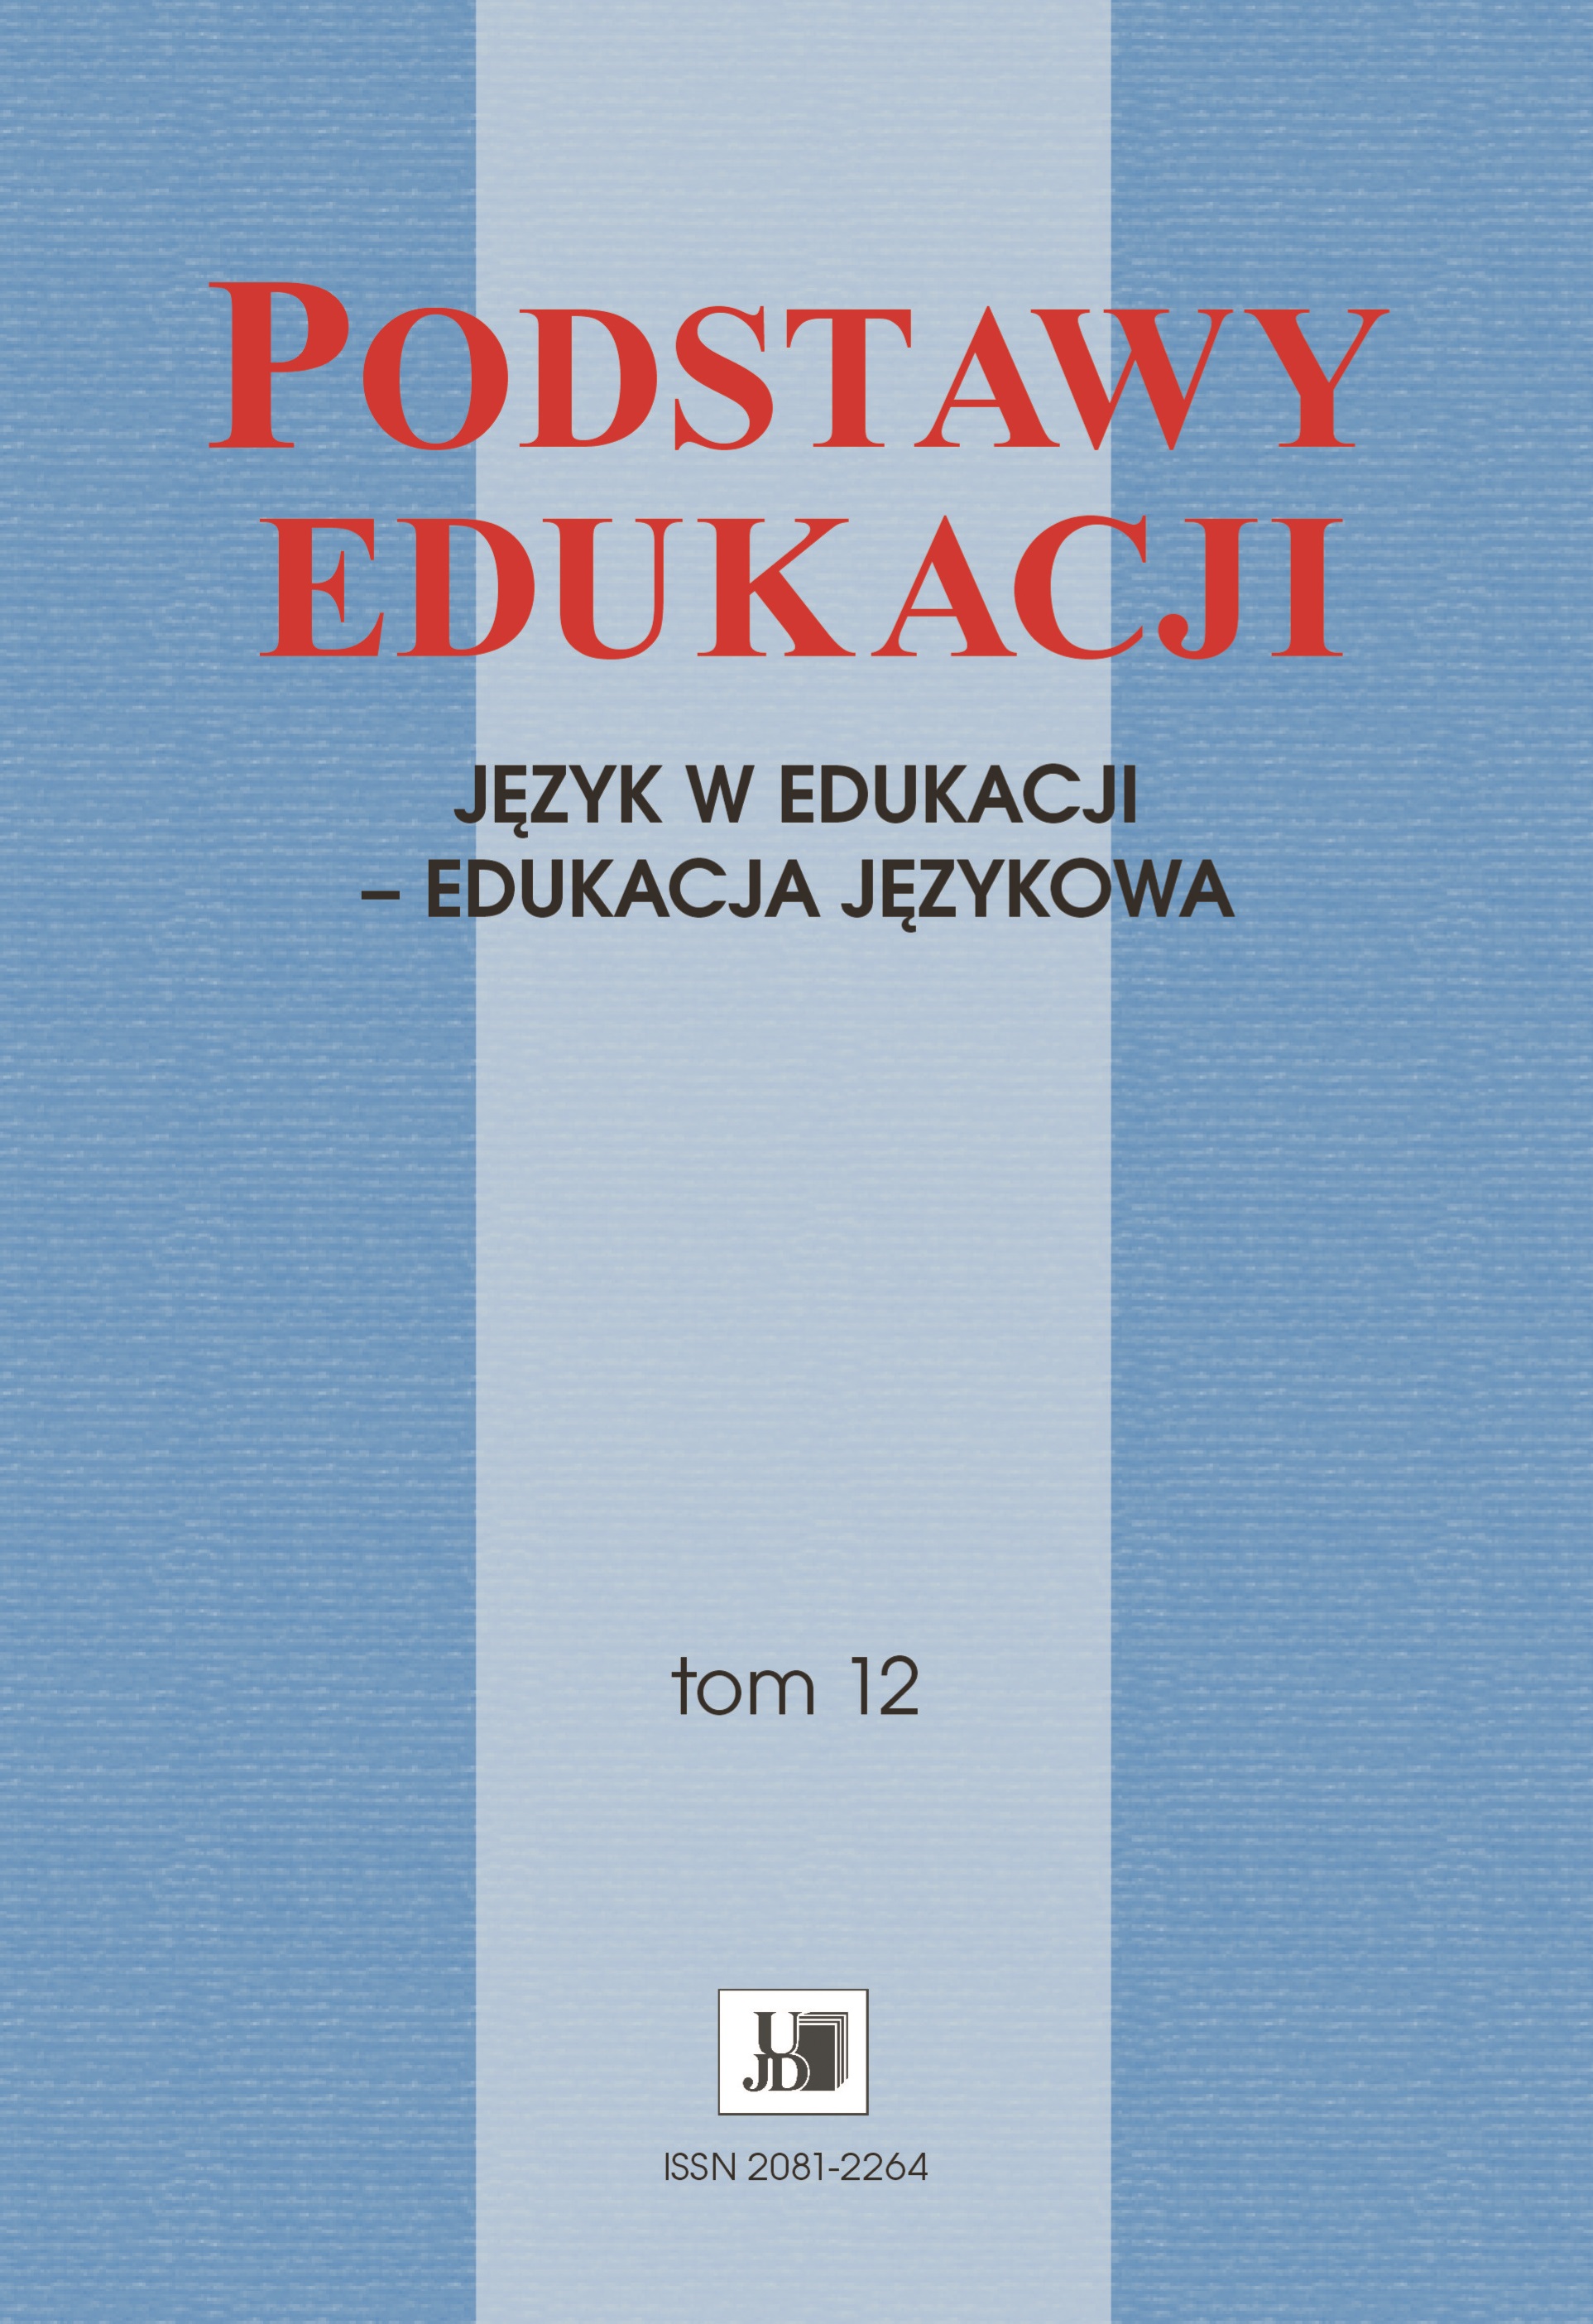 About the need to reflect upon the Polish Sign Language as a subject of teaching and learning Cover Image